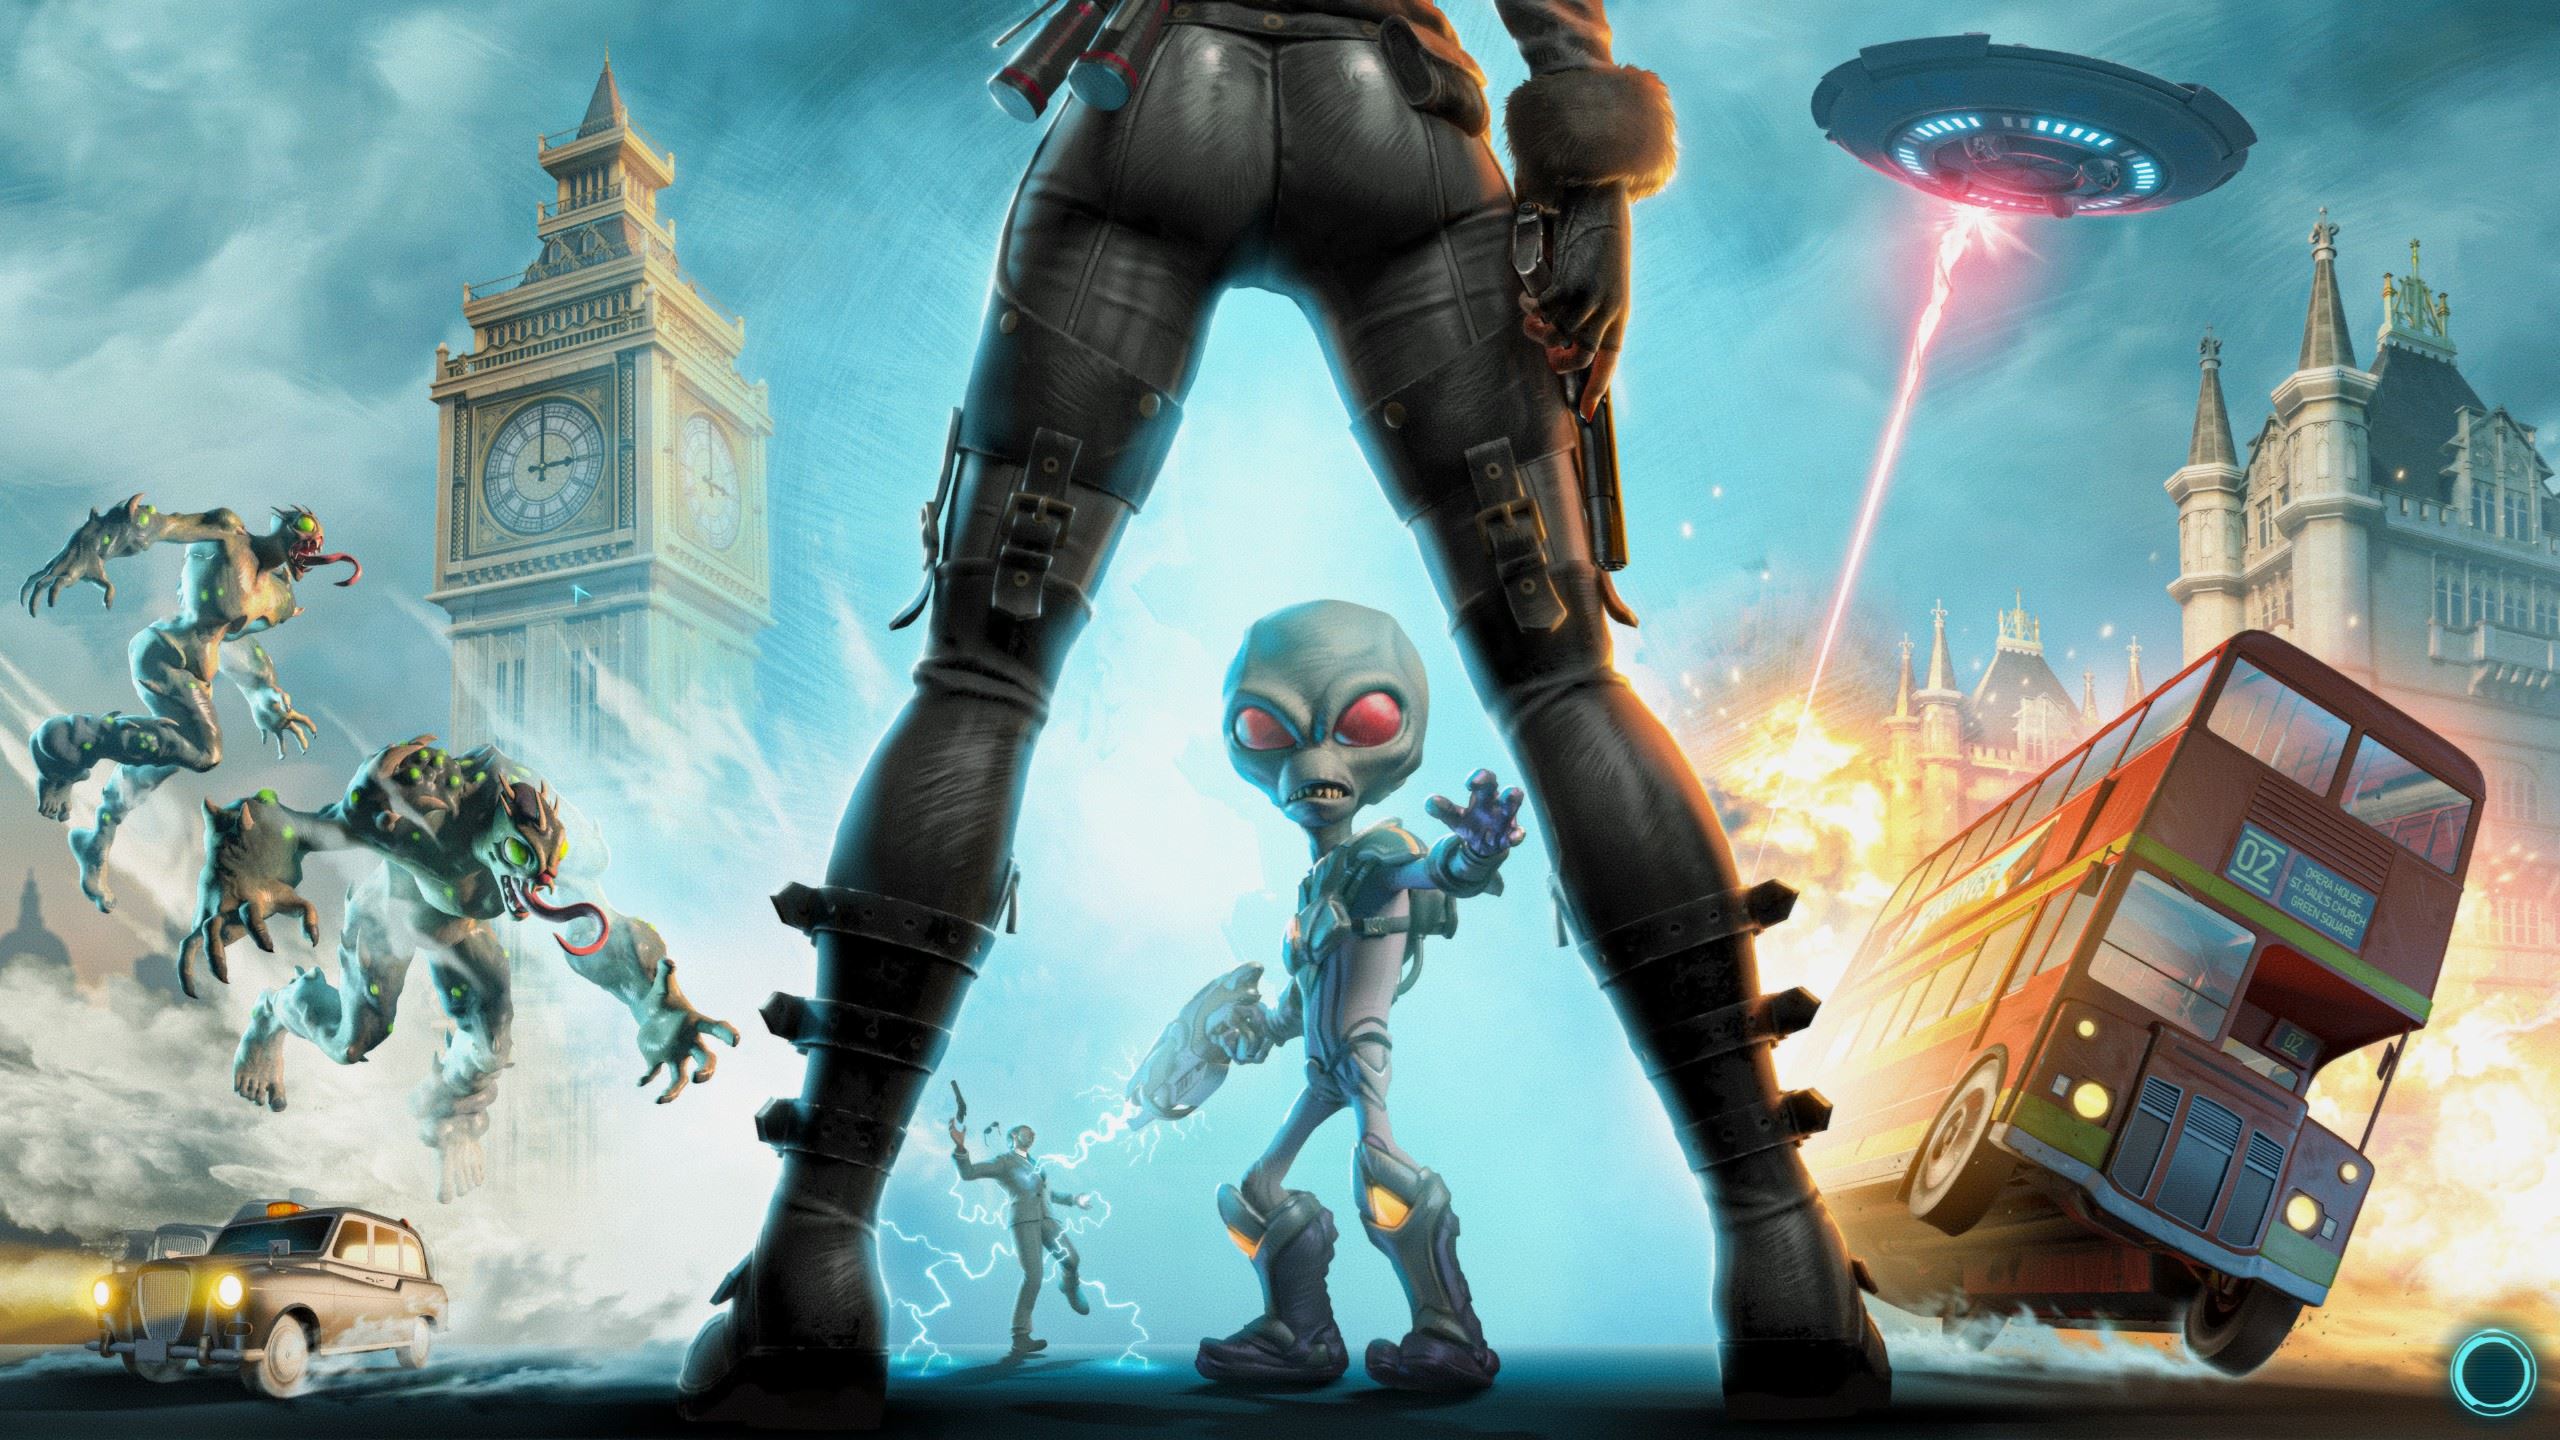 Destroy all humans reprobed. Destroy all Humans 2 reprobed. Игра destroy all Humans! 2 Reprobed. Destroy all Humans 2 reprobed 2022. Destroy all Humans! 2 - Reprobed Наташа.